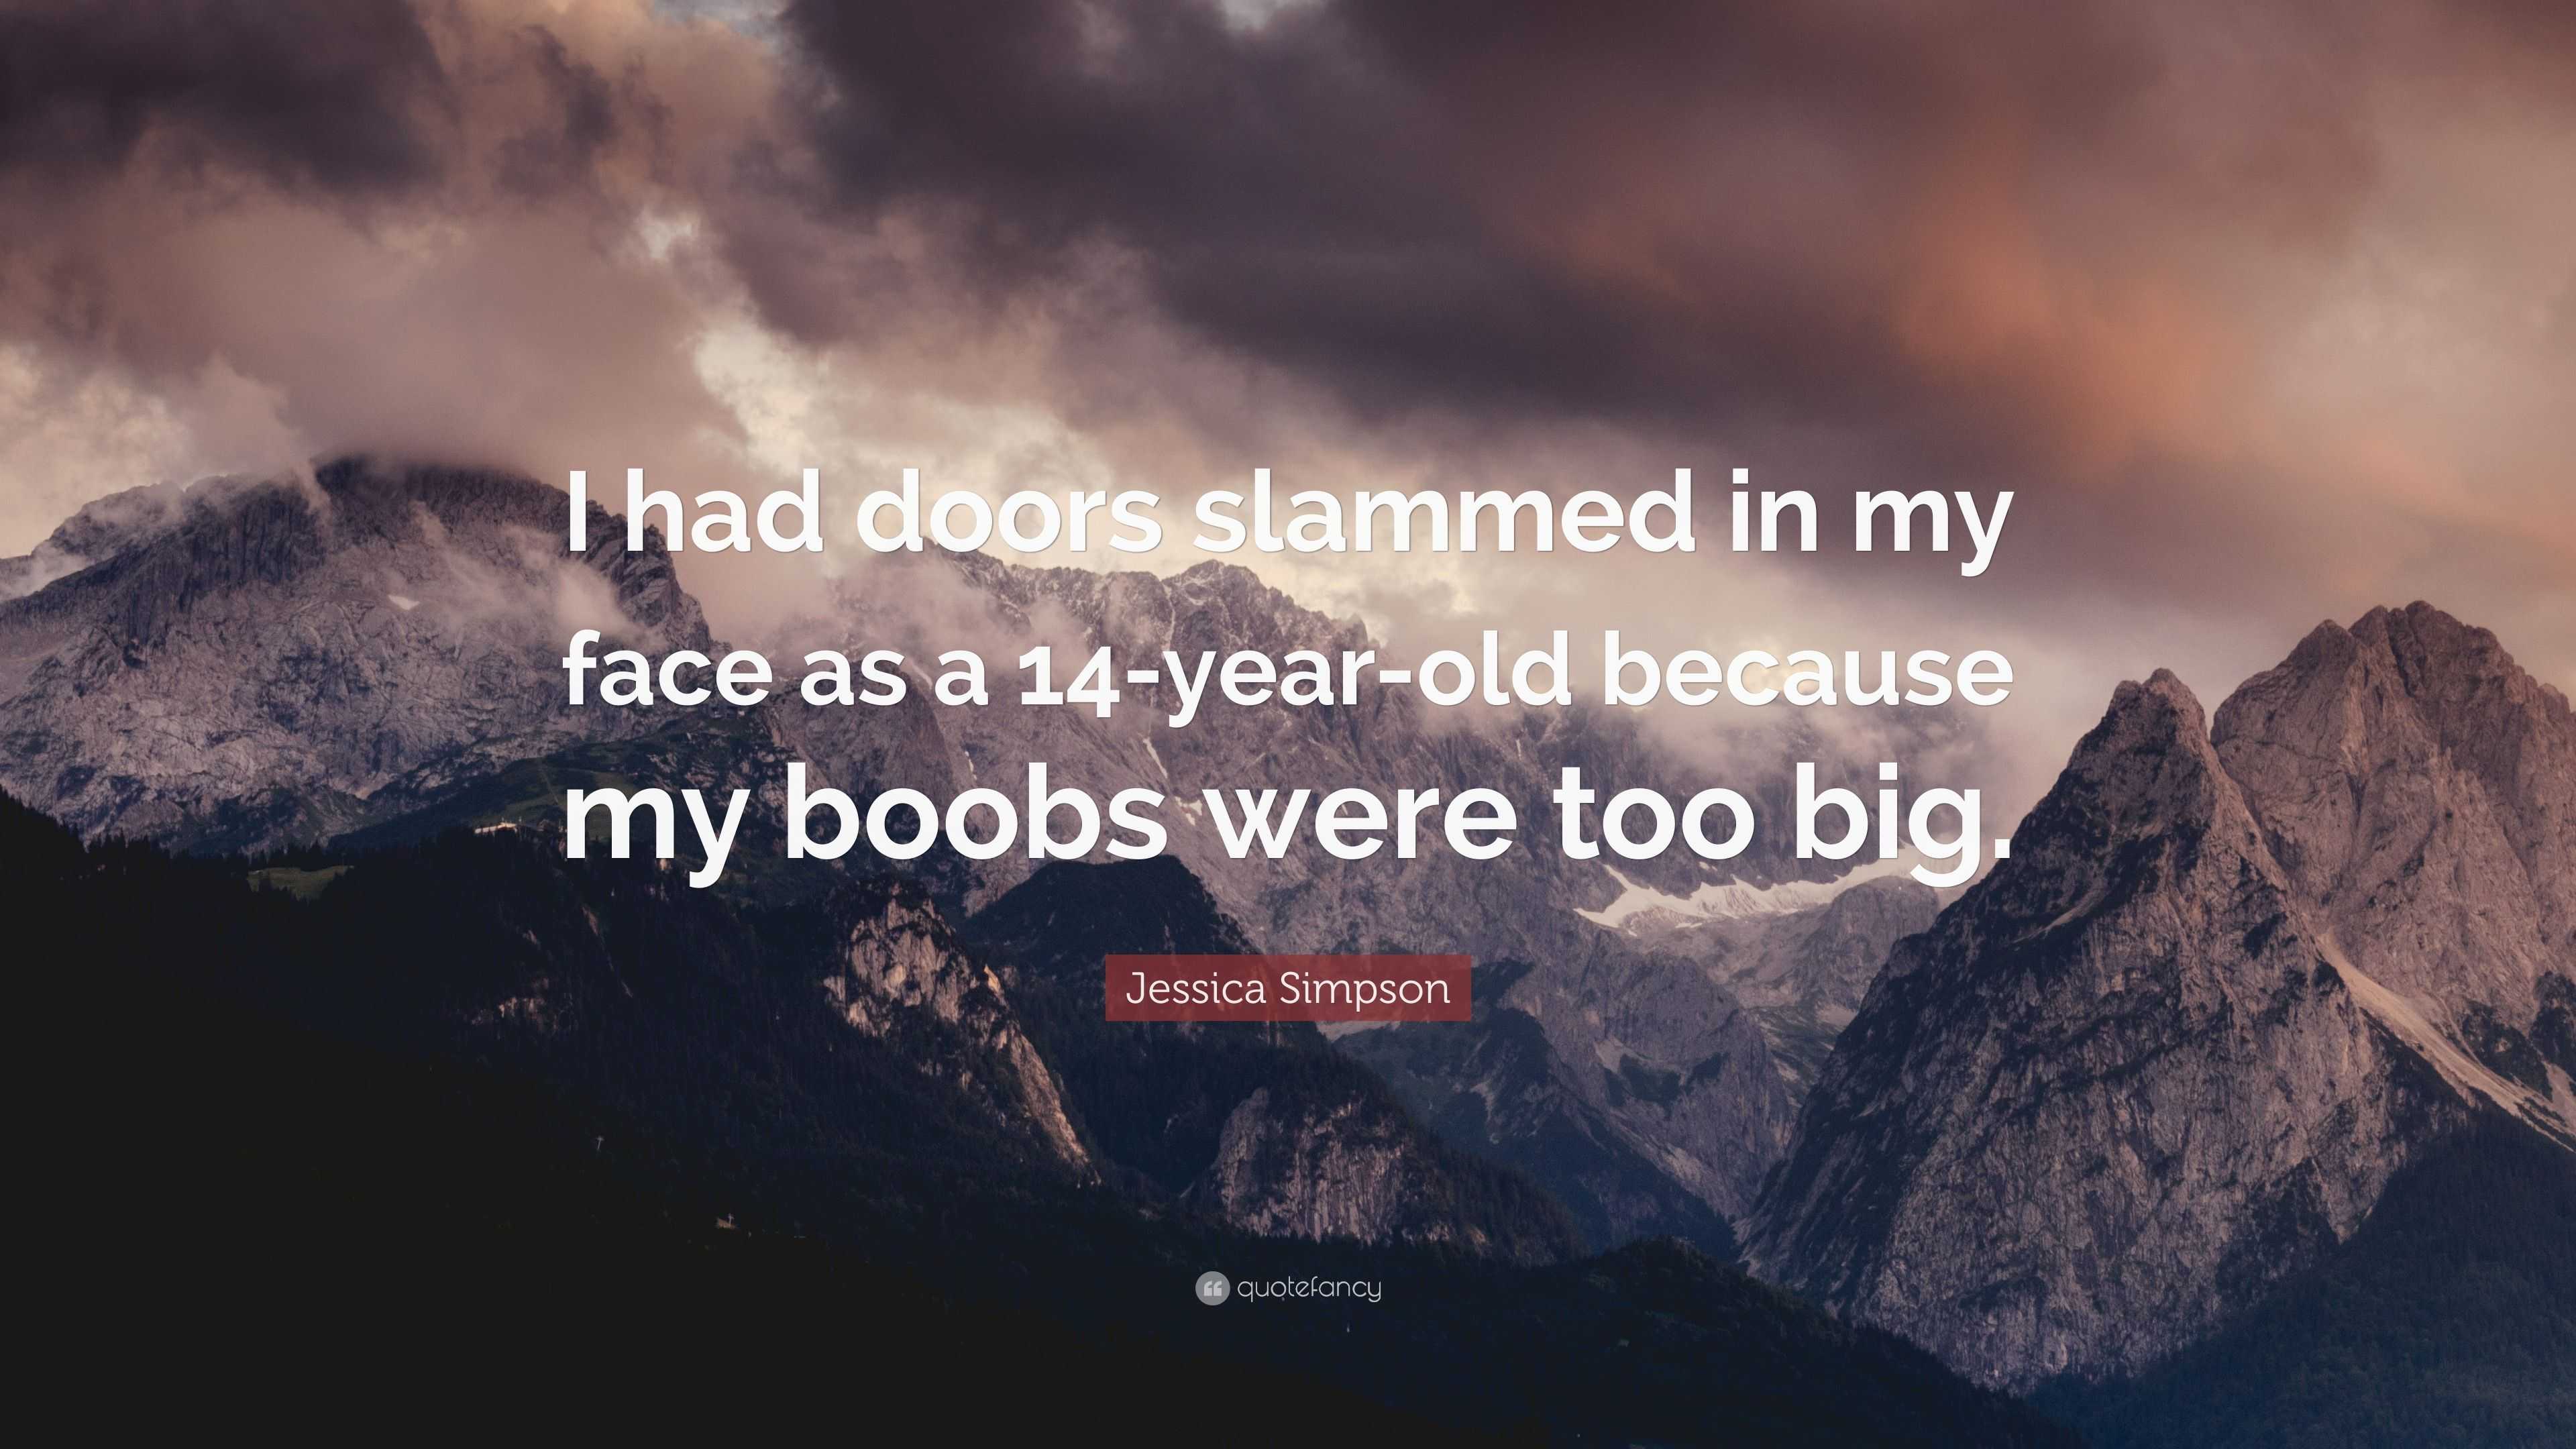 Jessica Simpson Quote: “I had doors slammed in my face as a 14